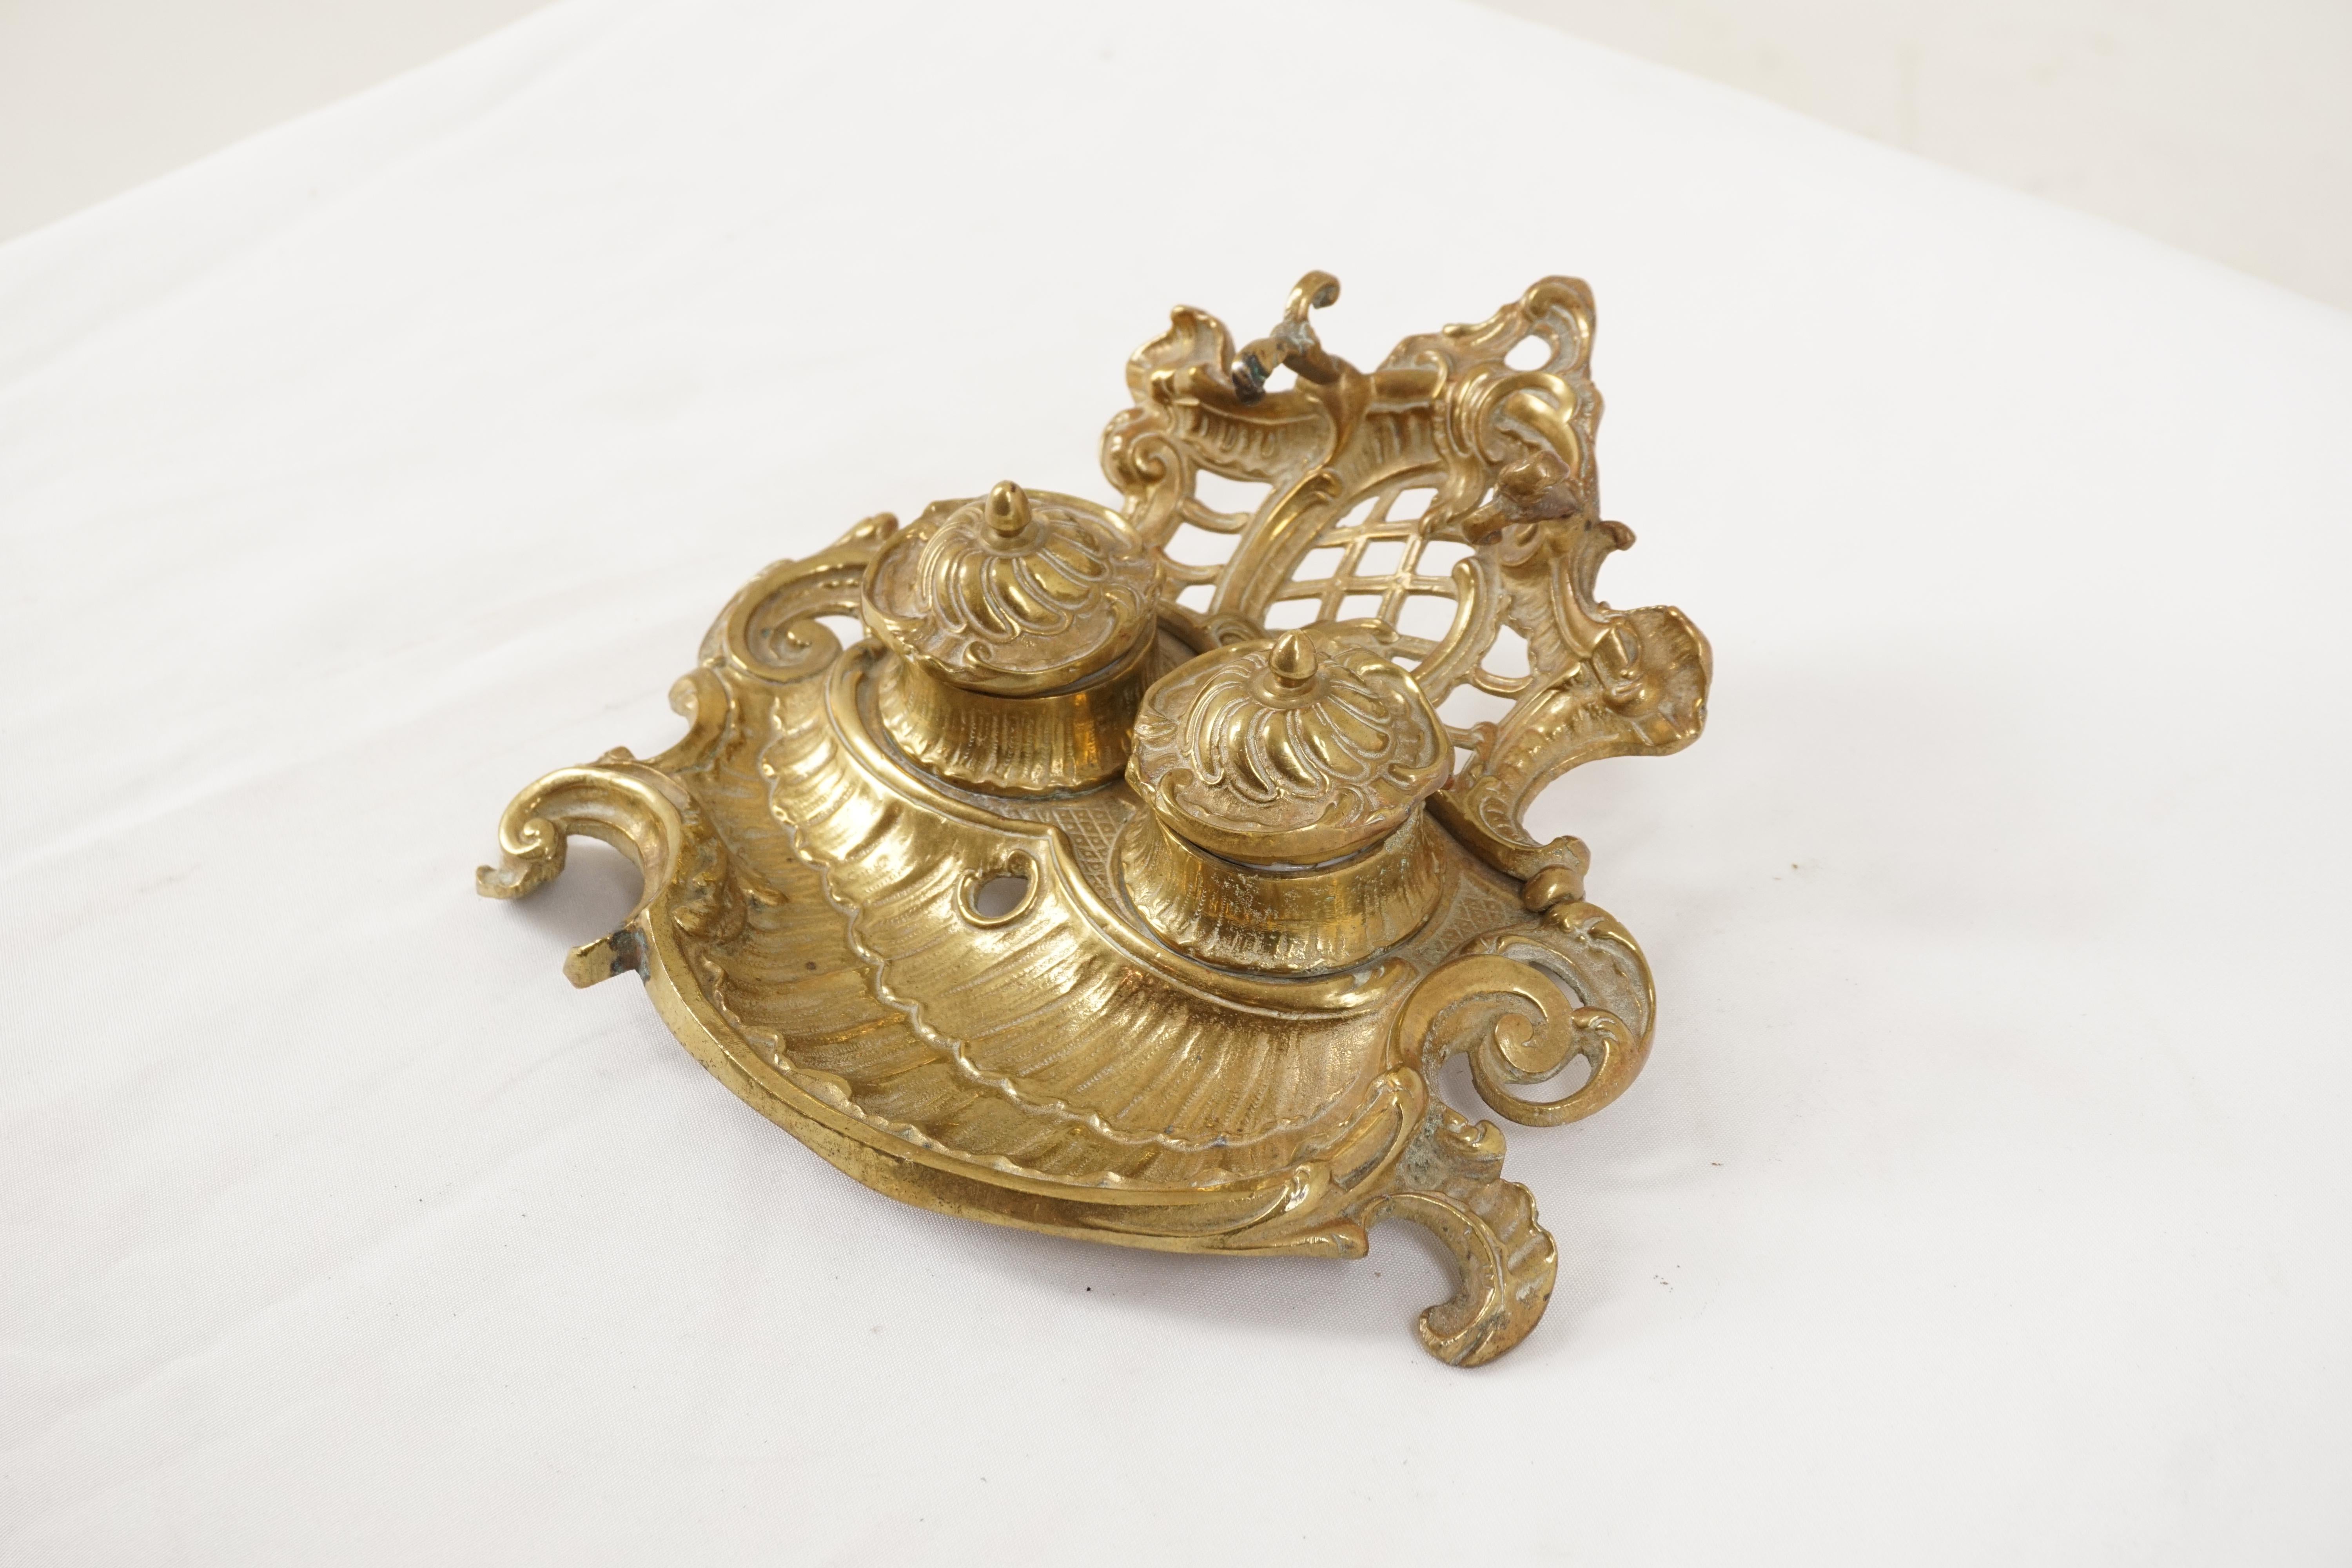 Antique Art Nouveau gilt bronze & brose double inkstand, Scotland 1910, H547

Scotland 1910
Brass 
Shaped back with pen rest.
Pair of inkwells with ceramic inserts. 
All standing on shaped brass feet.

H547

Measures: 9